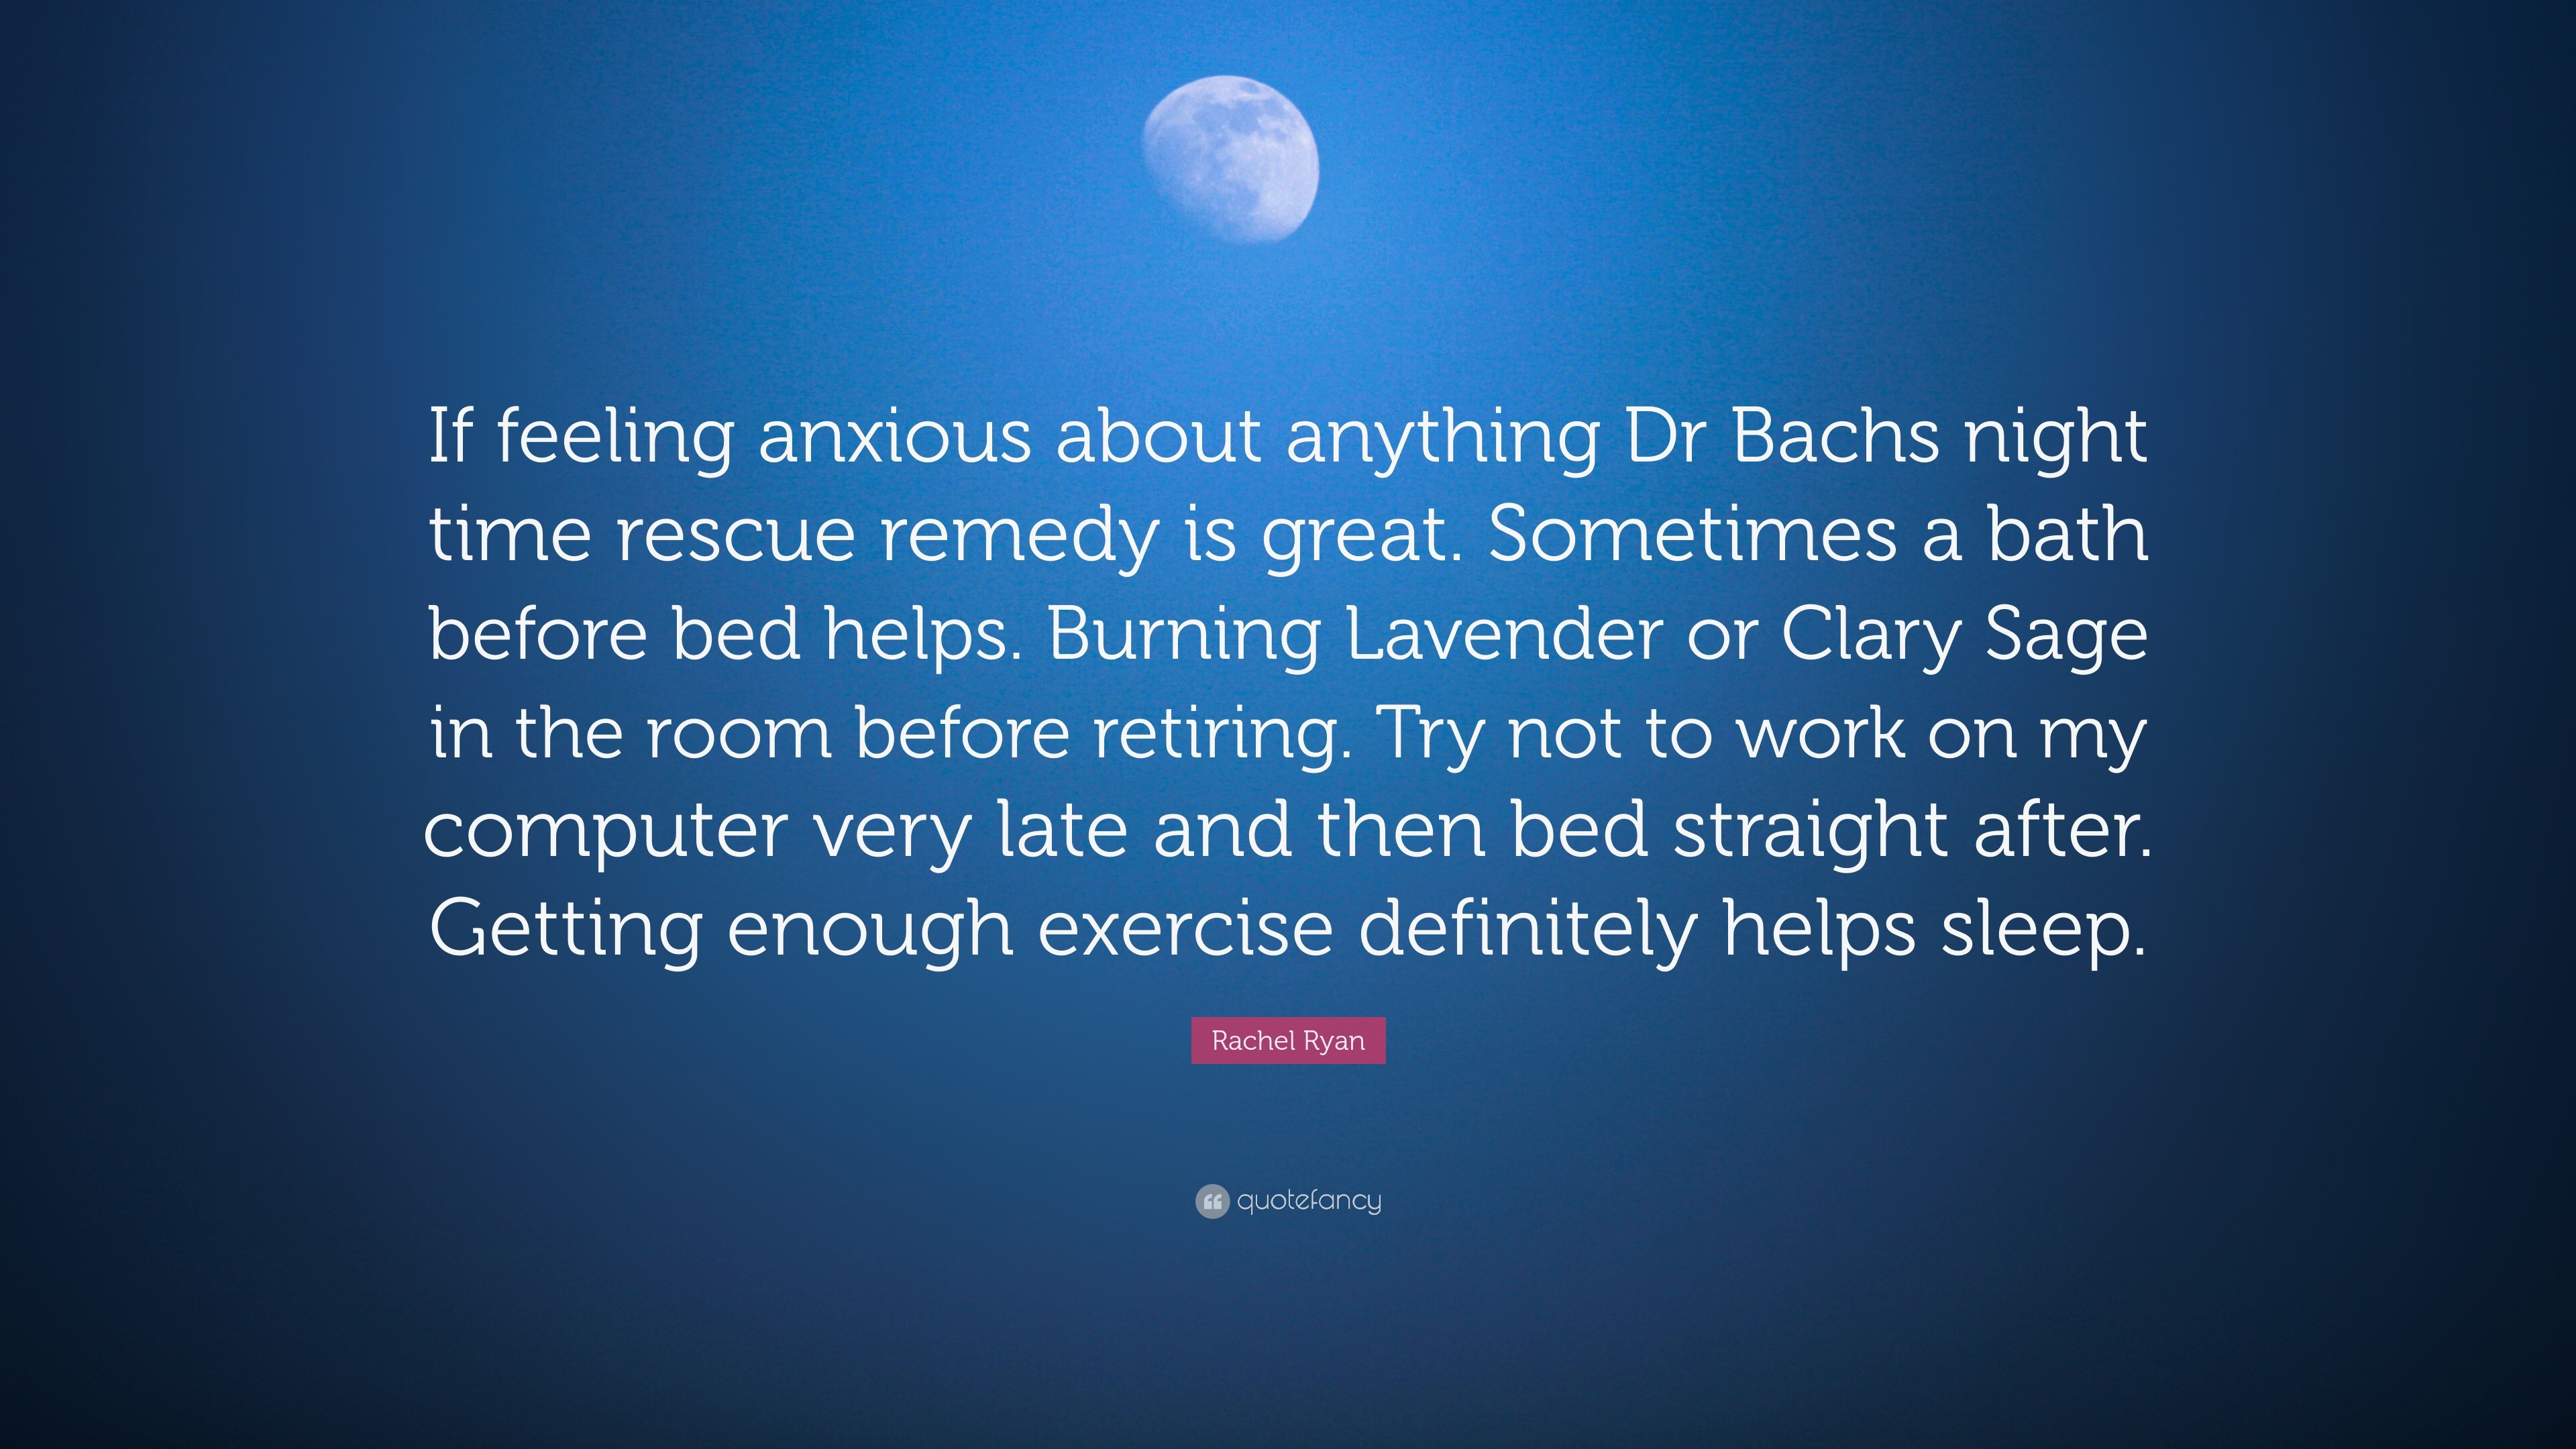 3840x2160 Rachel Ryan Quote: “If feeling anxious about anything Dr Bachs night time  rescue remedy